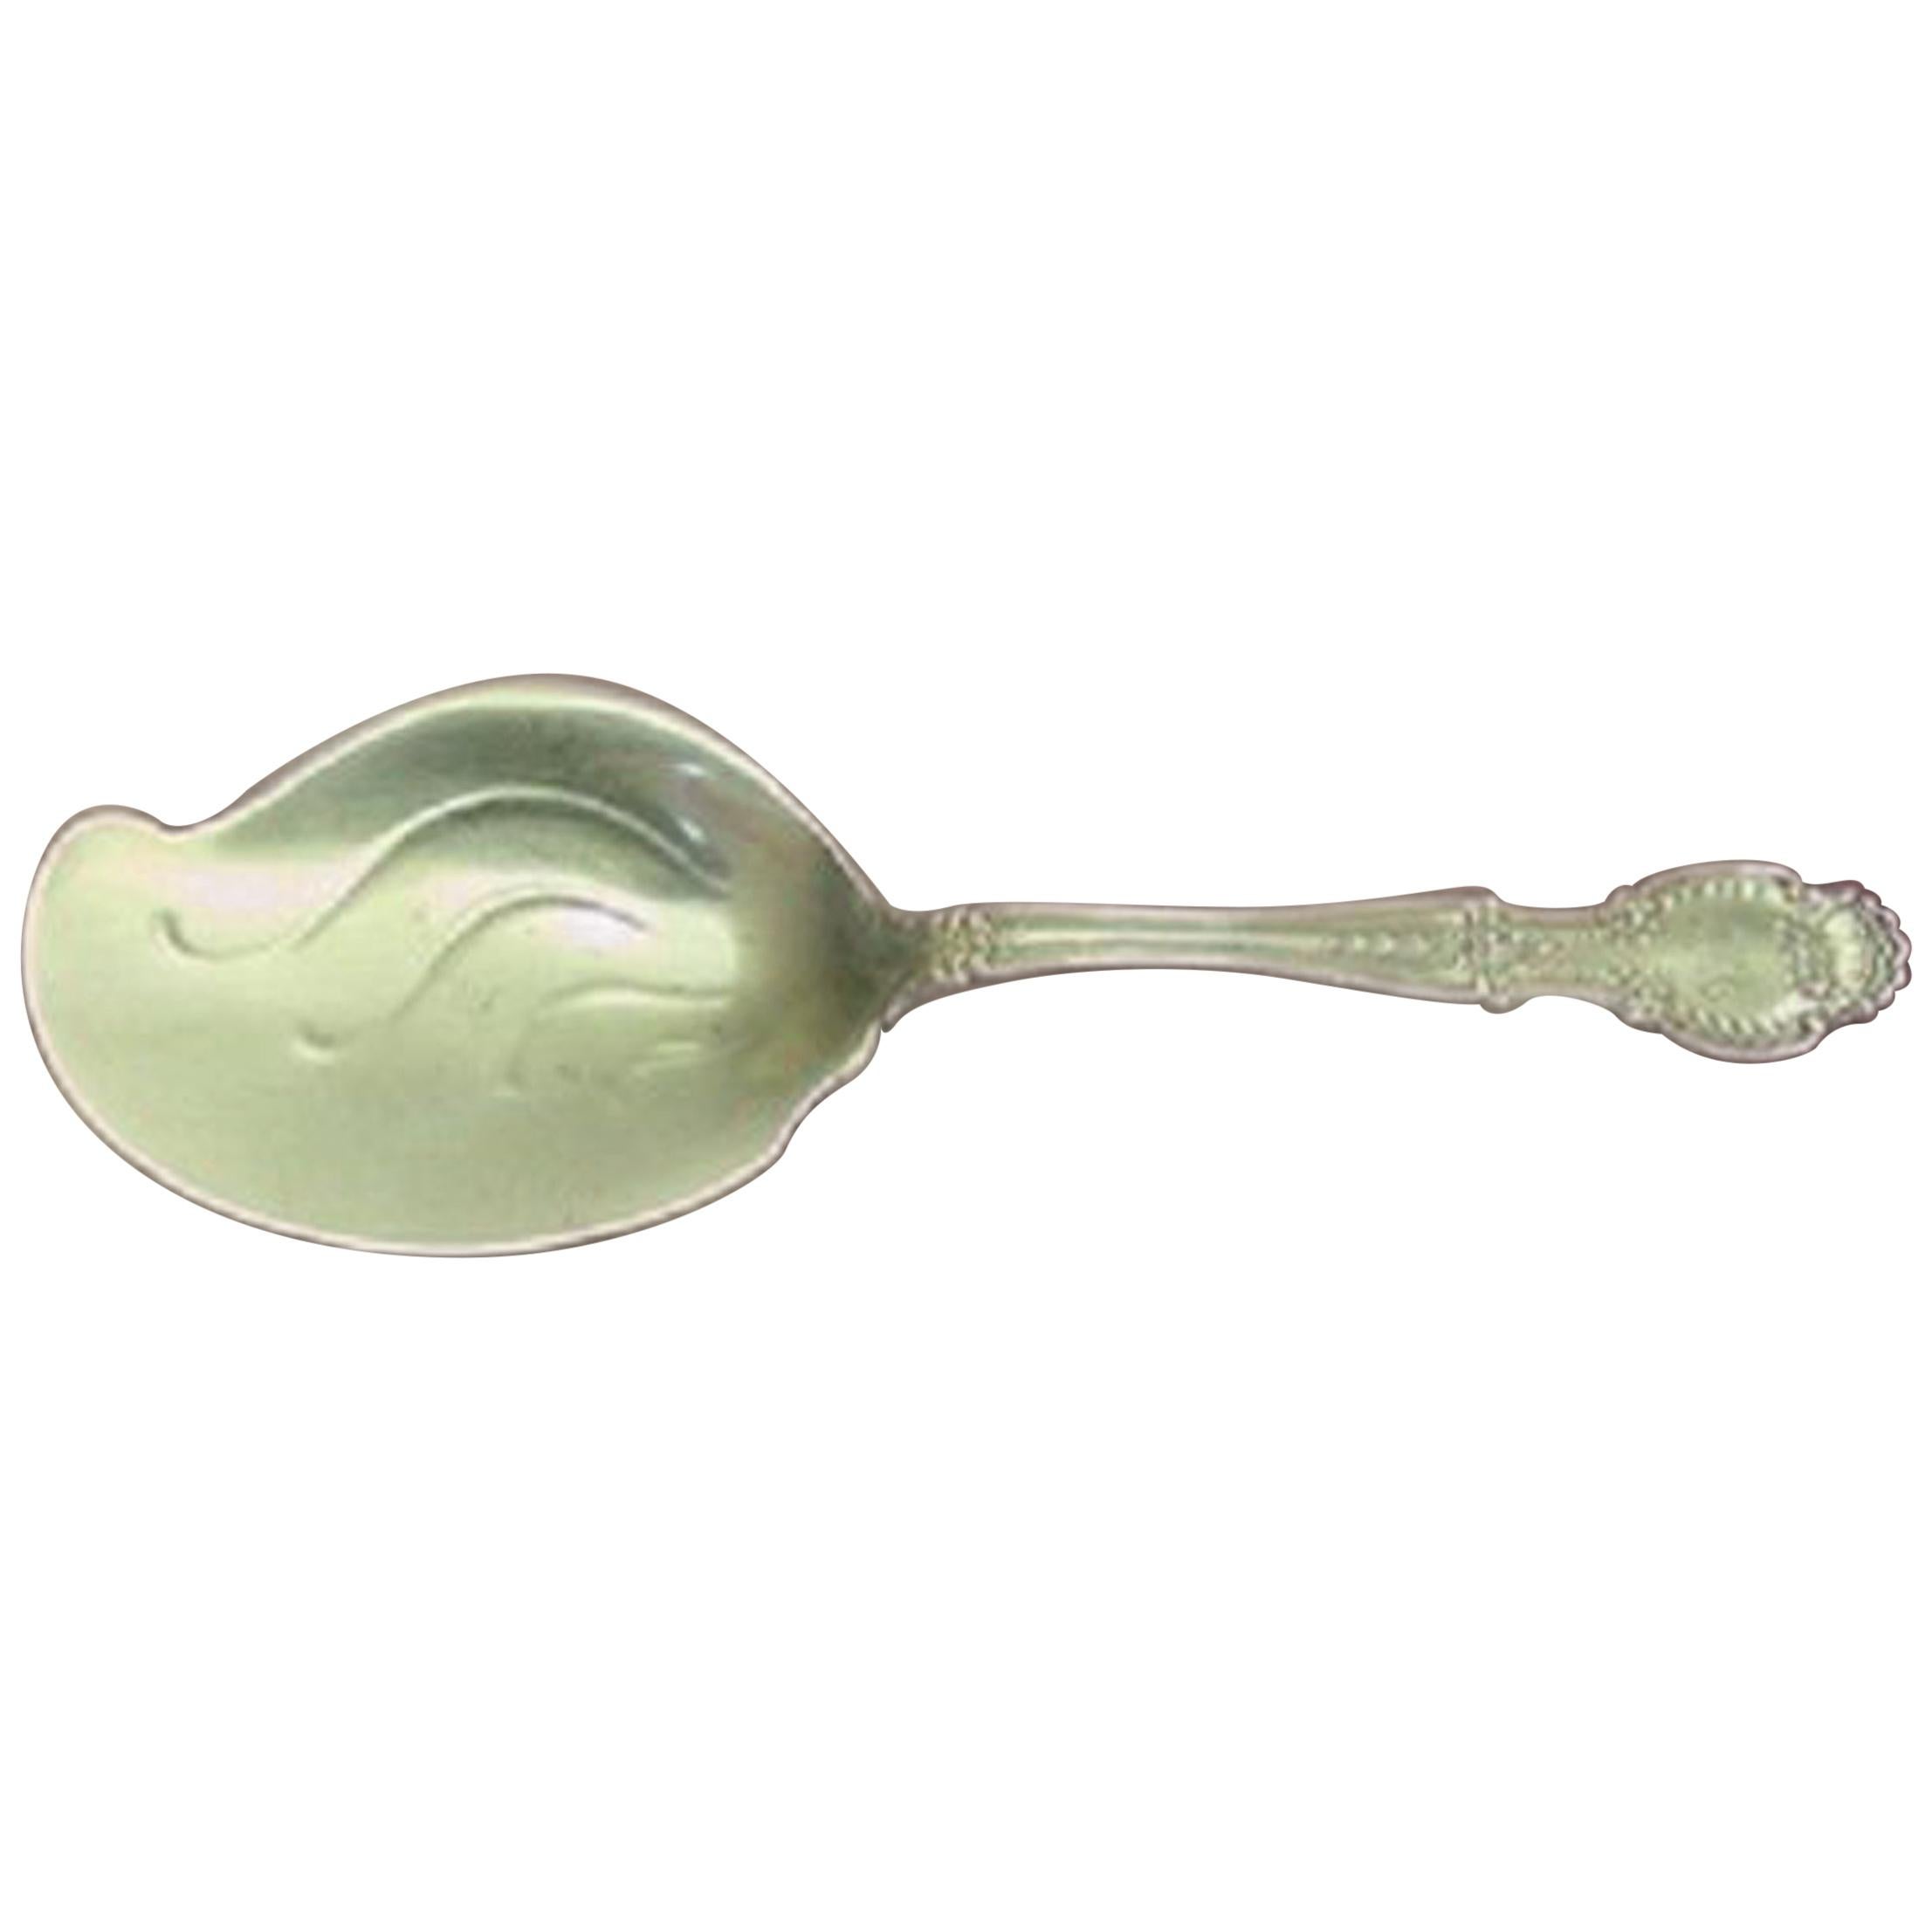 Richelieu by Tiffany and Co. Sterling Silver Sorbet Server